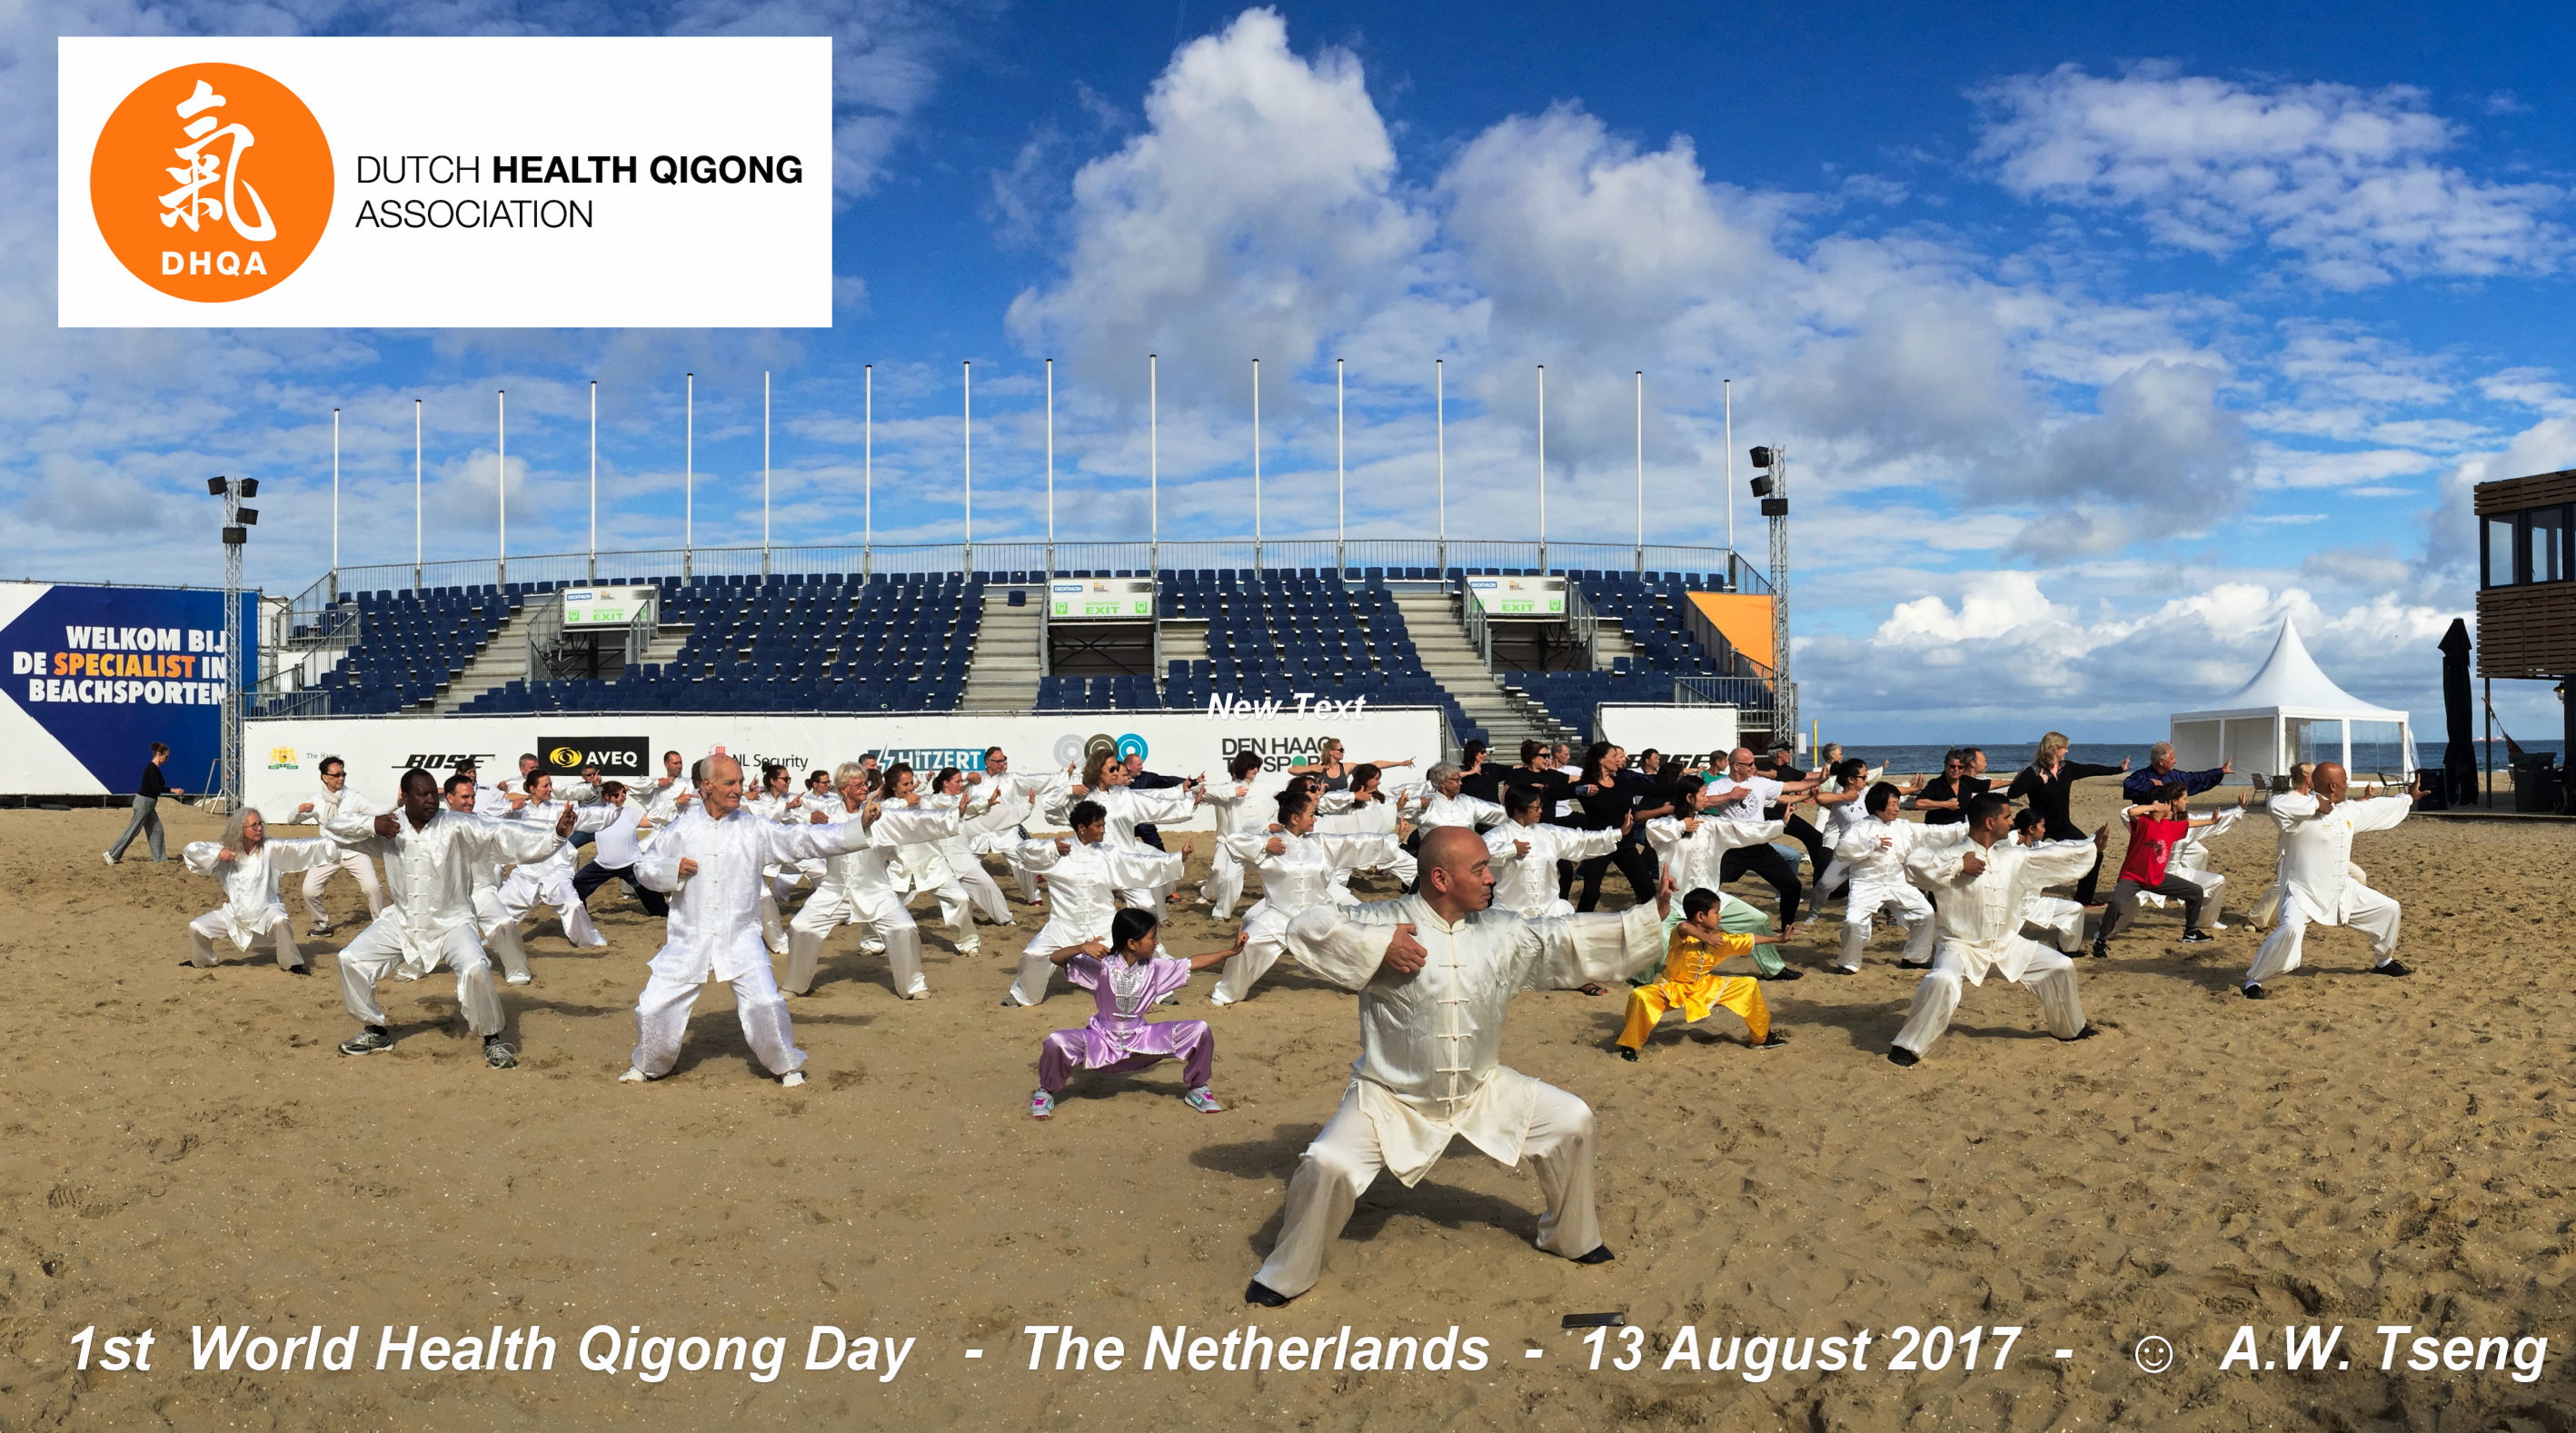 First World Health Qigong Day held at the Beach Volleyball stadion of The Hague in The Netherlands